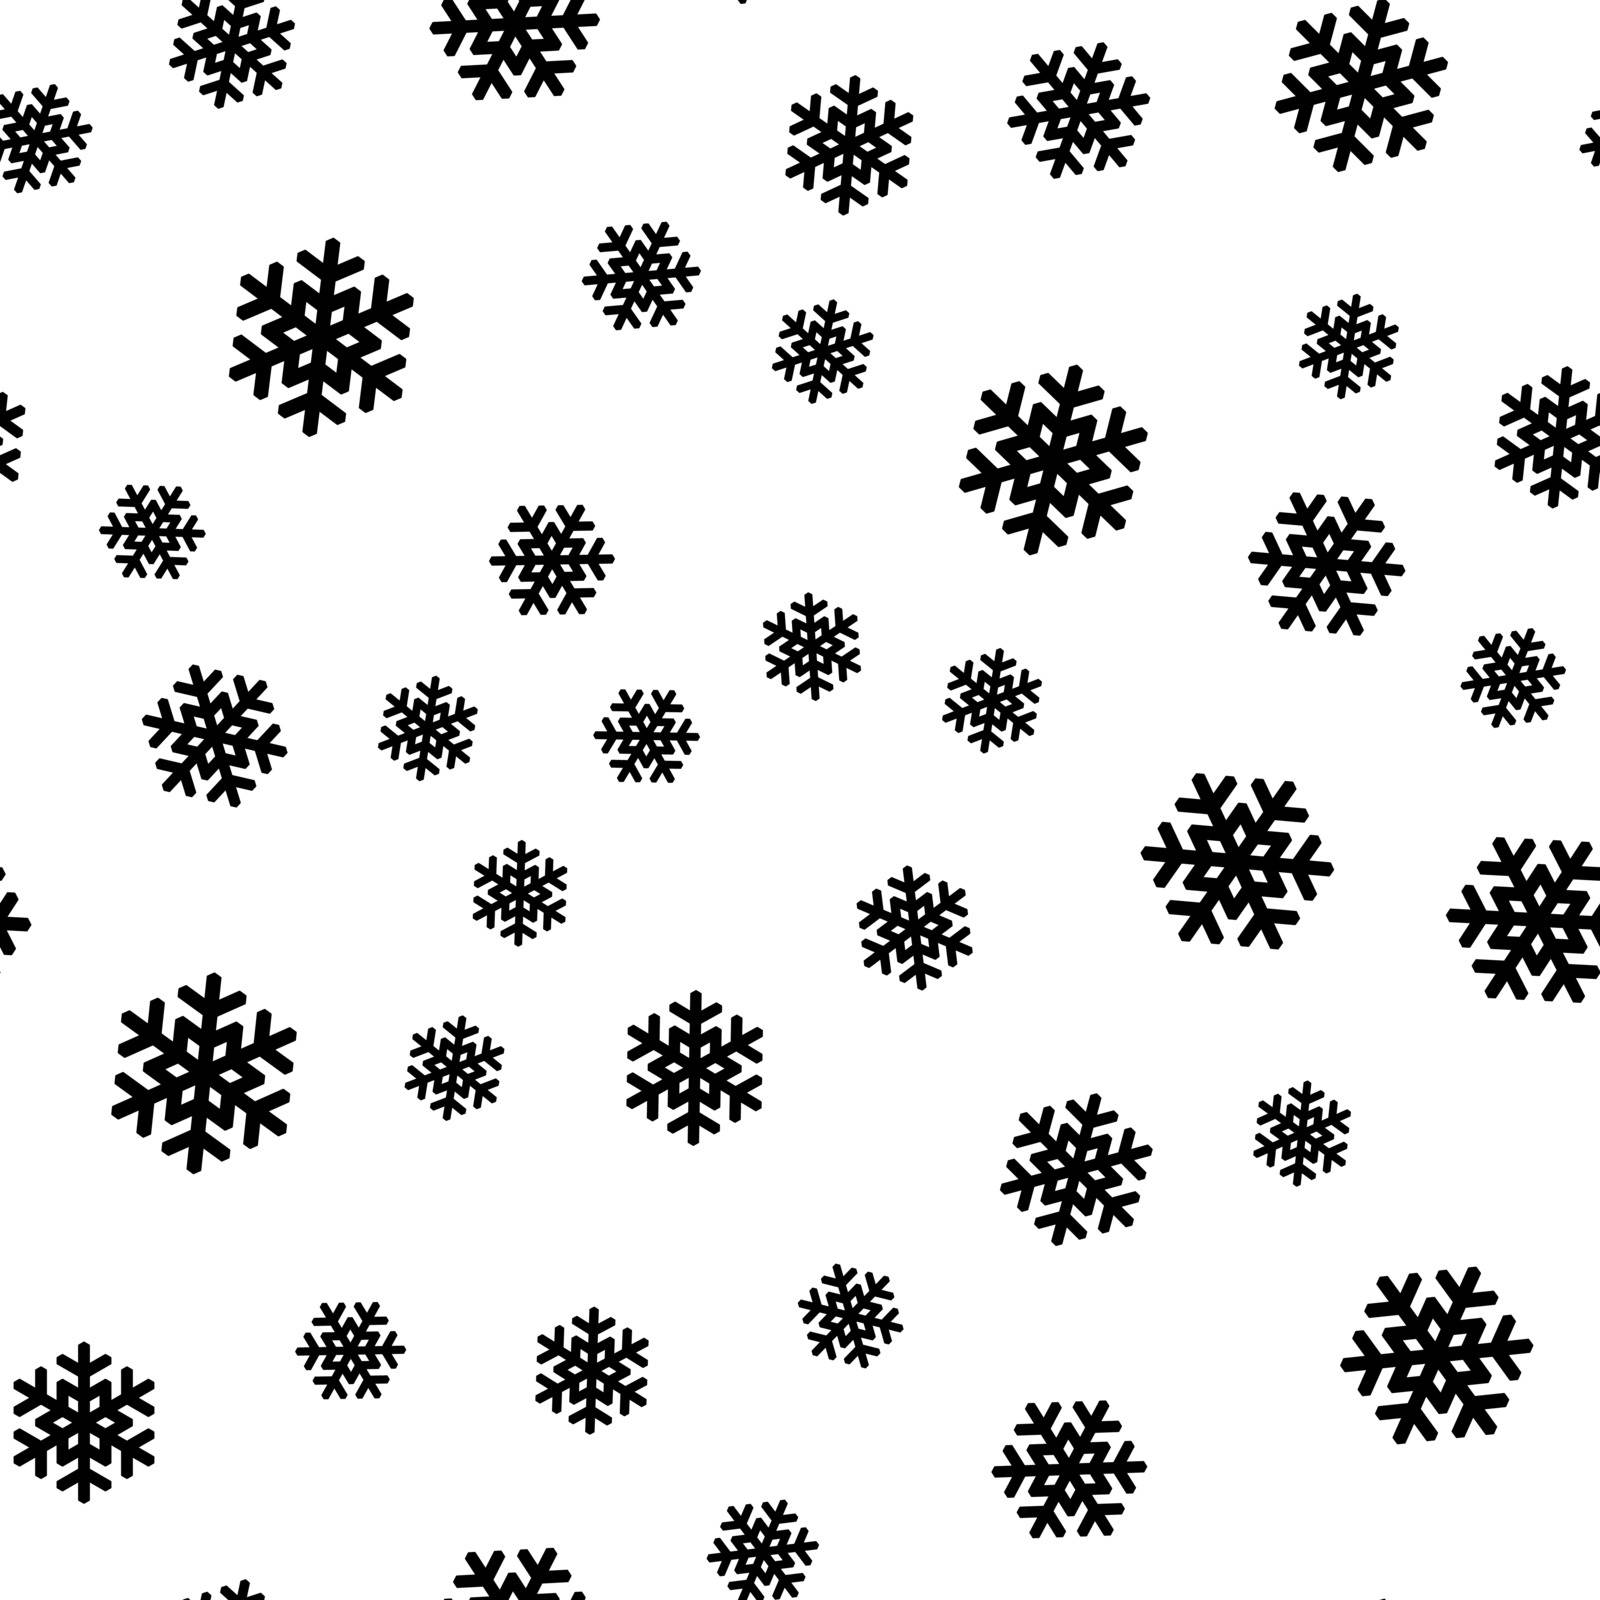 It is snowing. Seamless pattern of snowflakes. Christmas or winter theme vector background by pyty